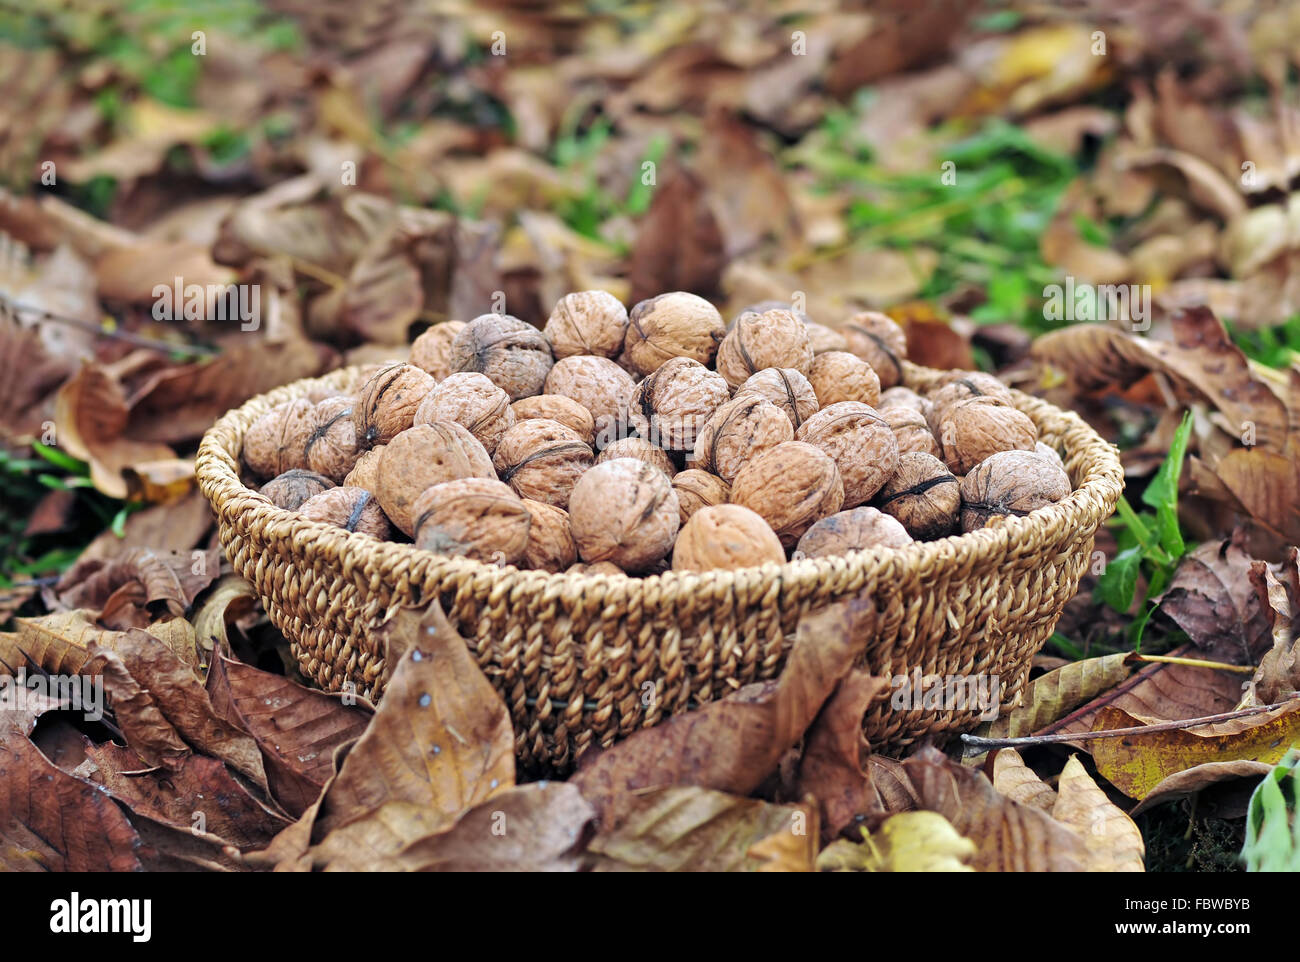 Harvested walnuts in a basket Stock Photo